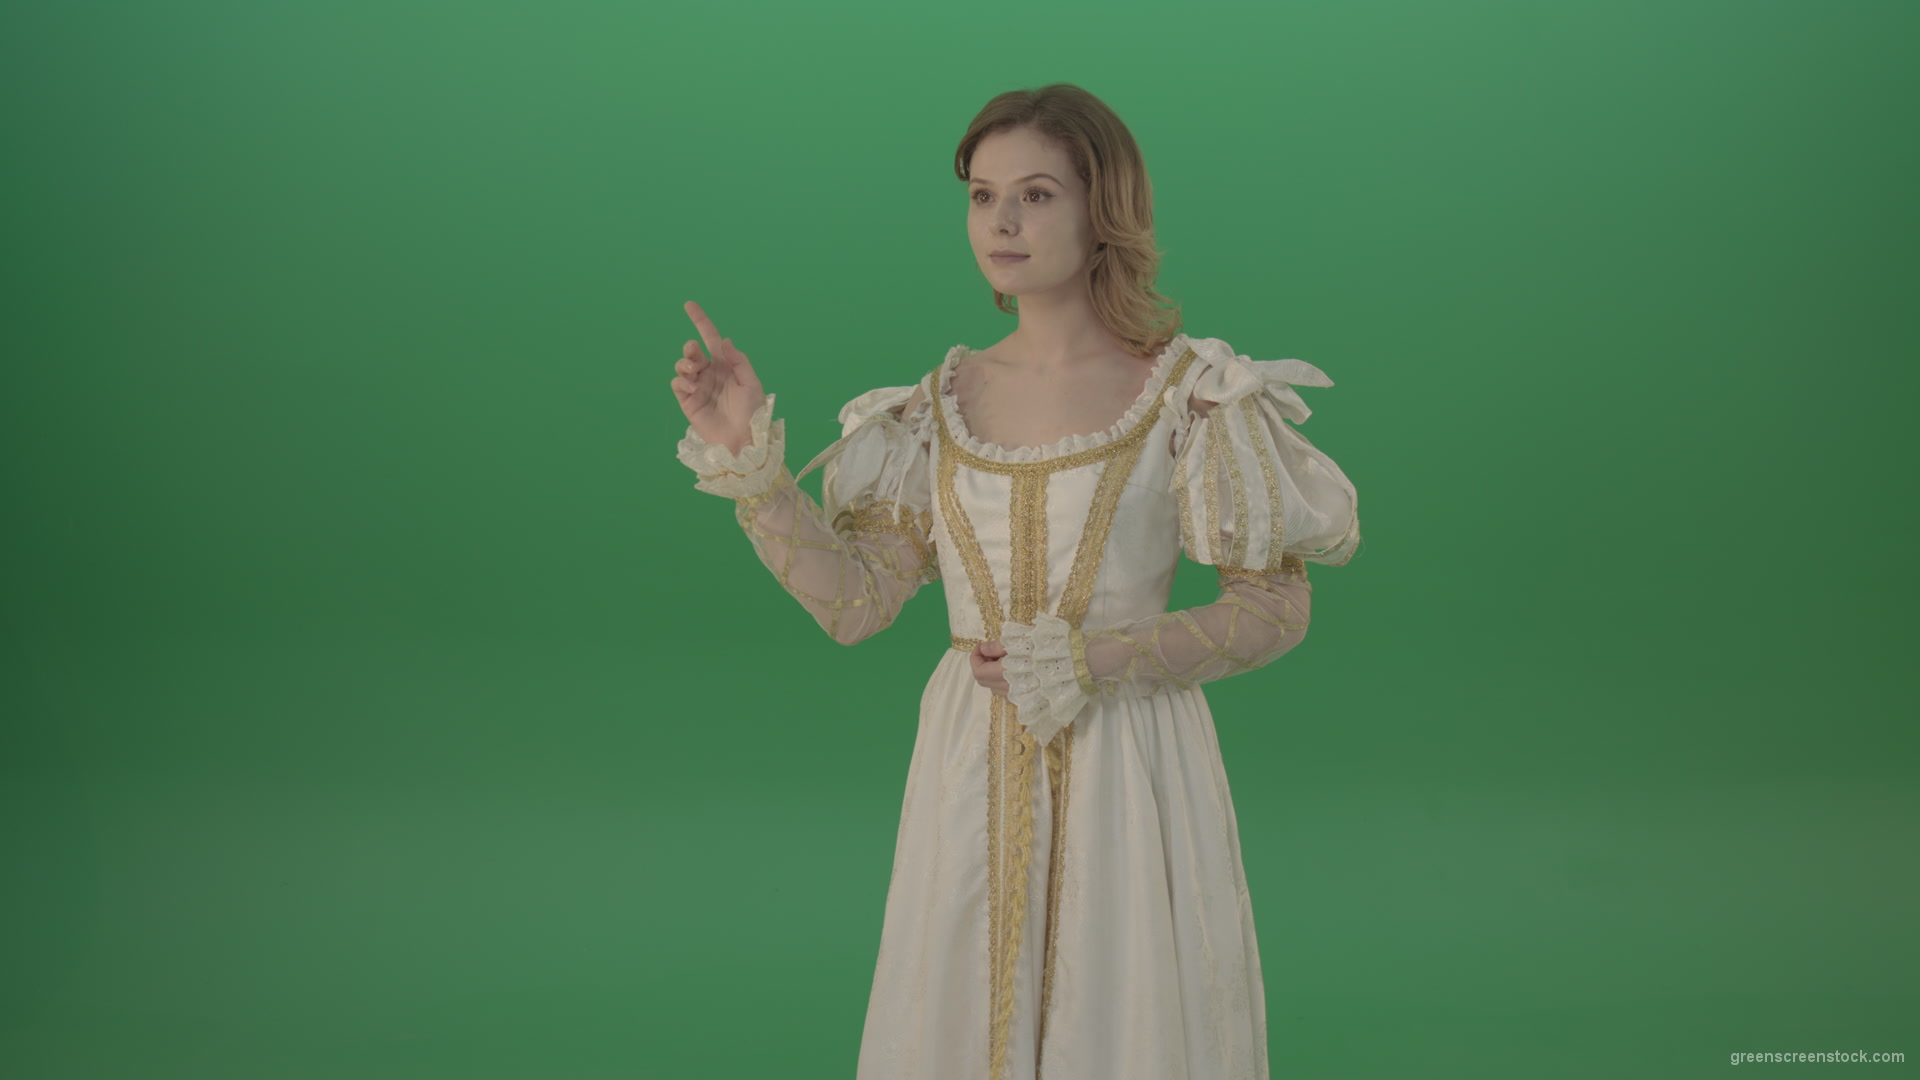 Flipping-a-virtual-reality-screen-the-girl-gladly-looks-at-the-photo-isolated-on-green-screen_002 Green Screen Stock